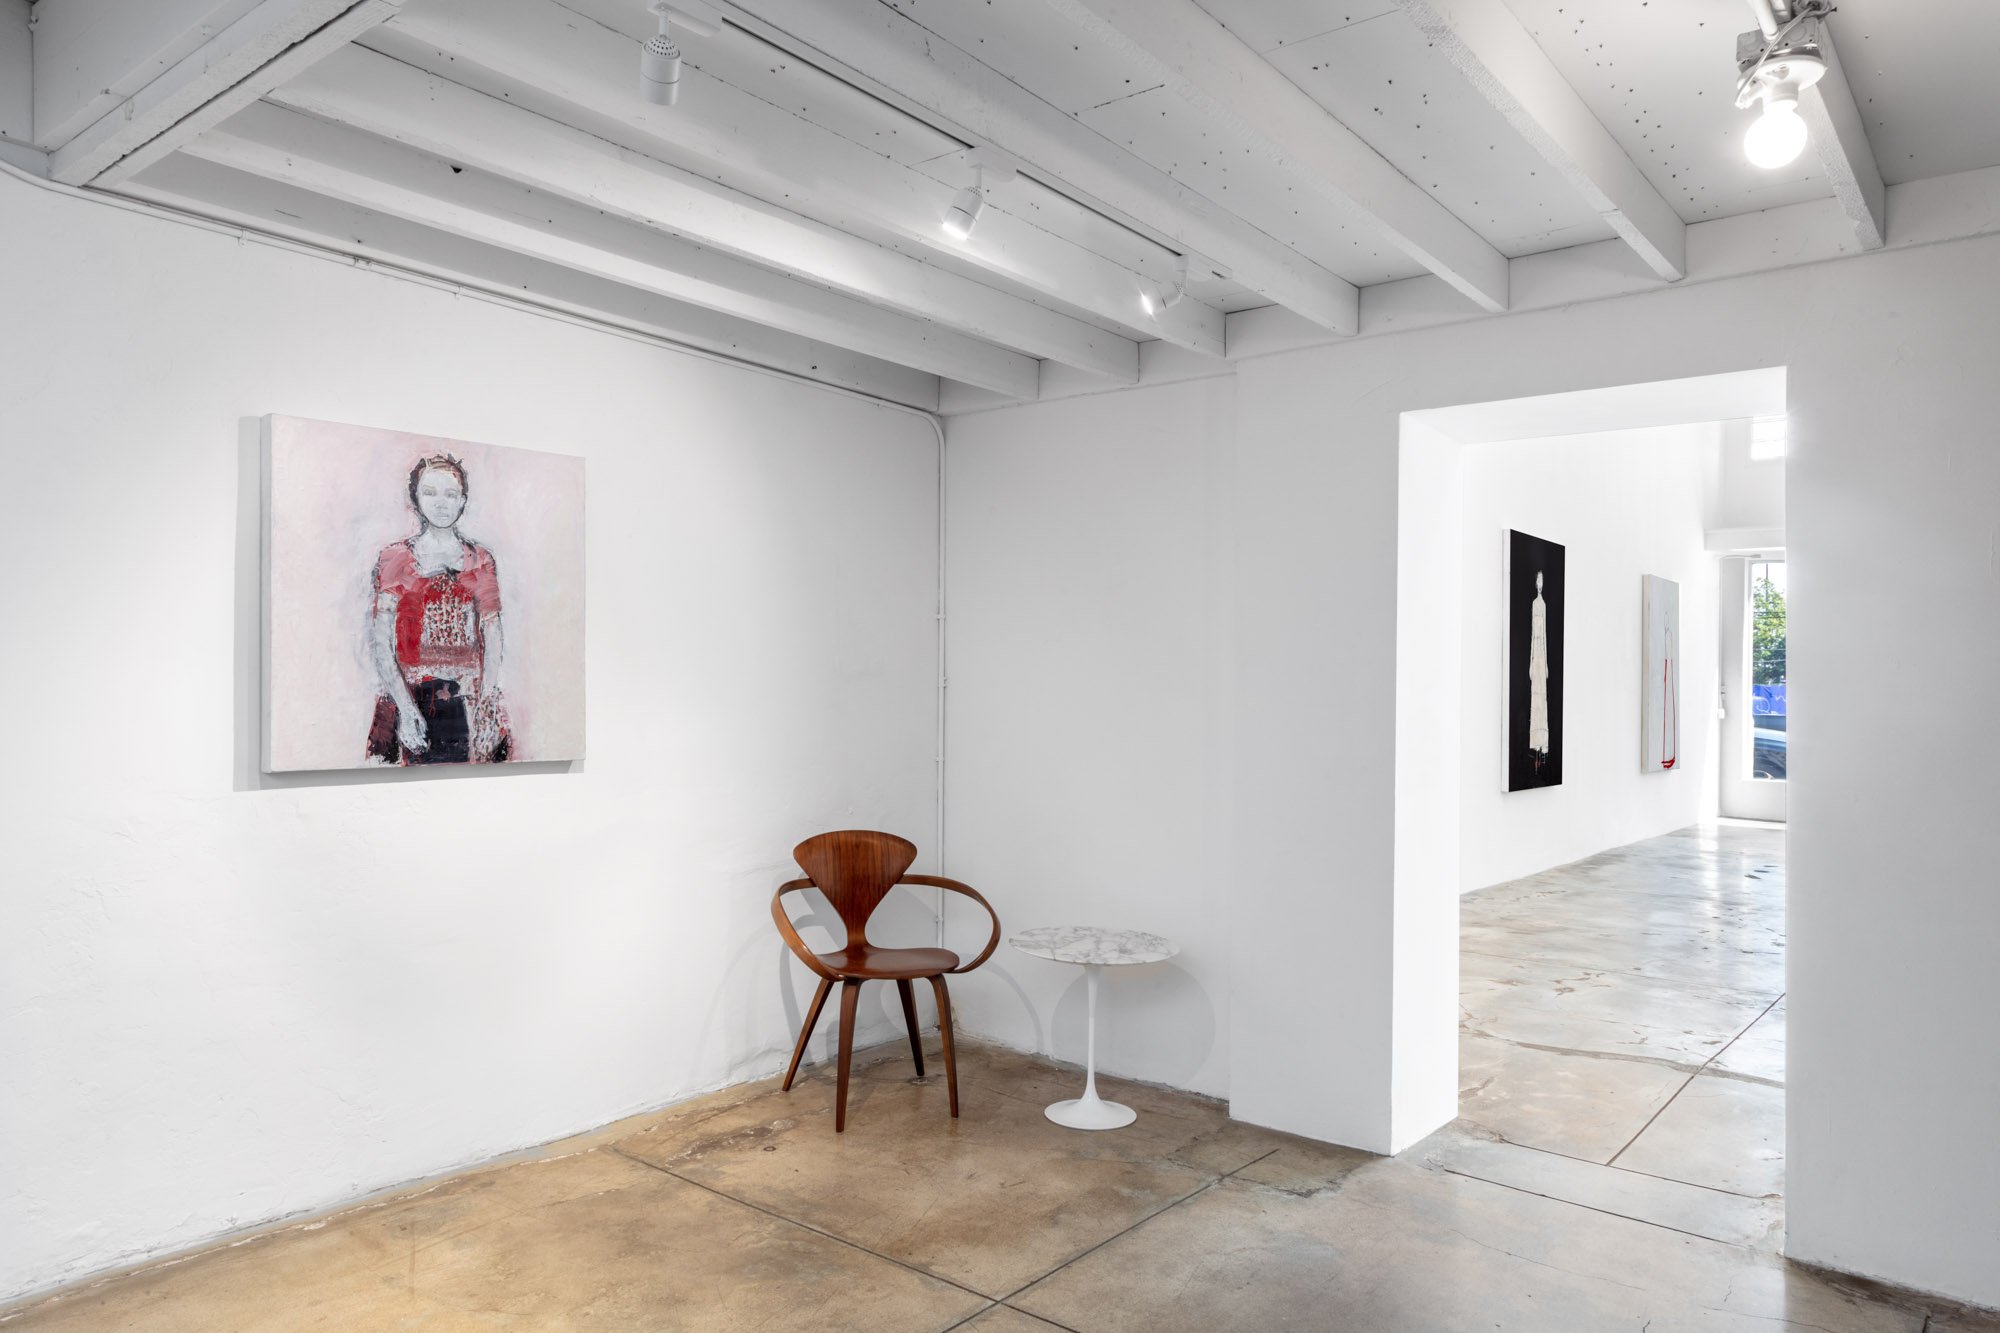  Installation view. Courtesy the artist and Lowell Ryan Projects 